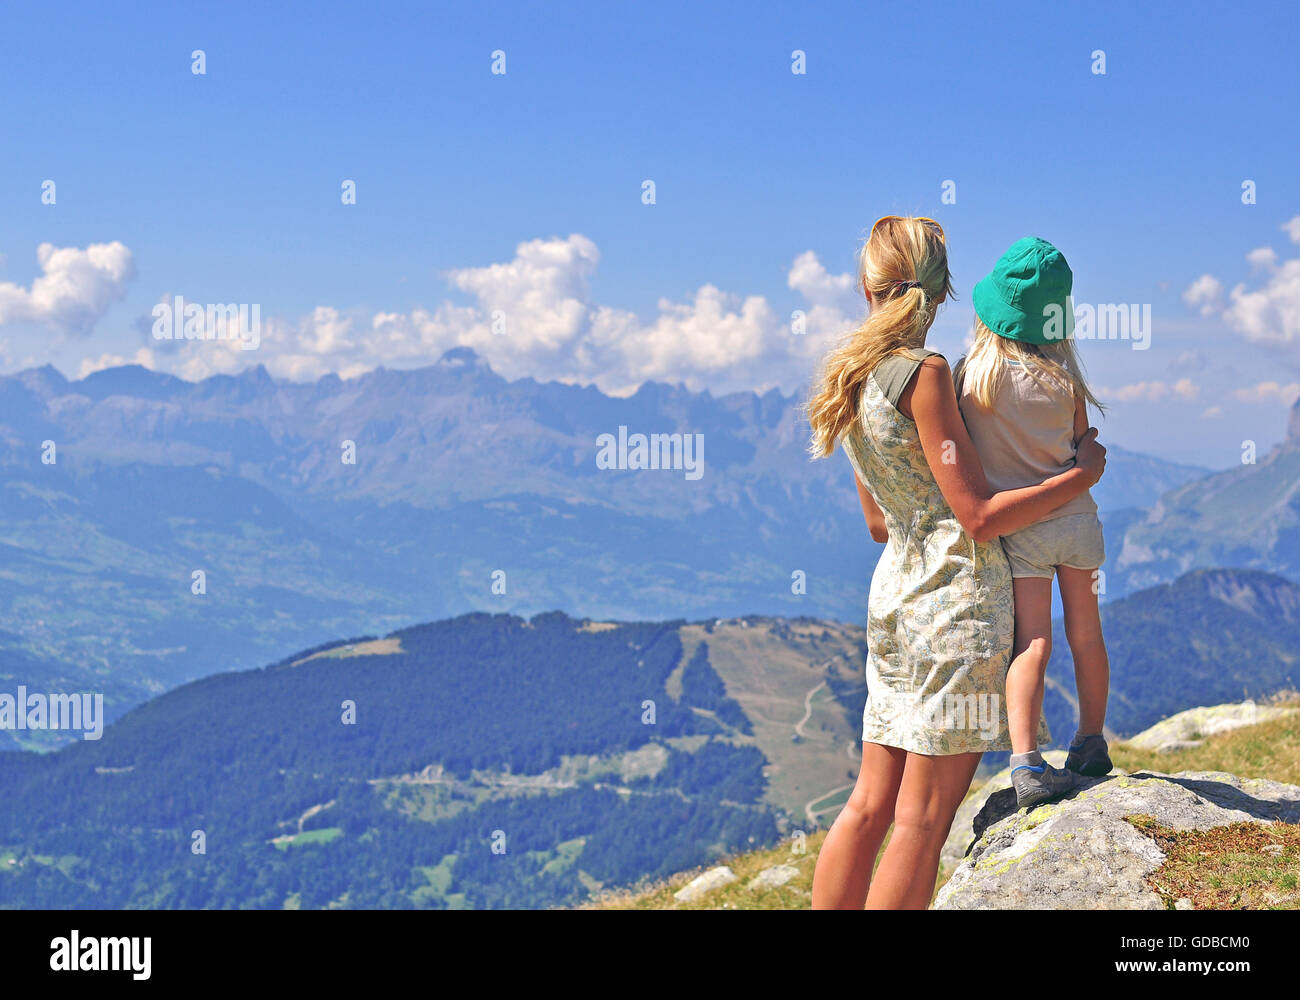 Mum with a child in mountains Stock Photo